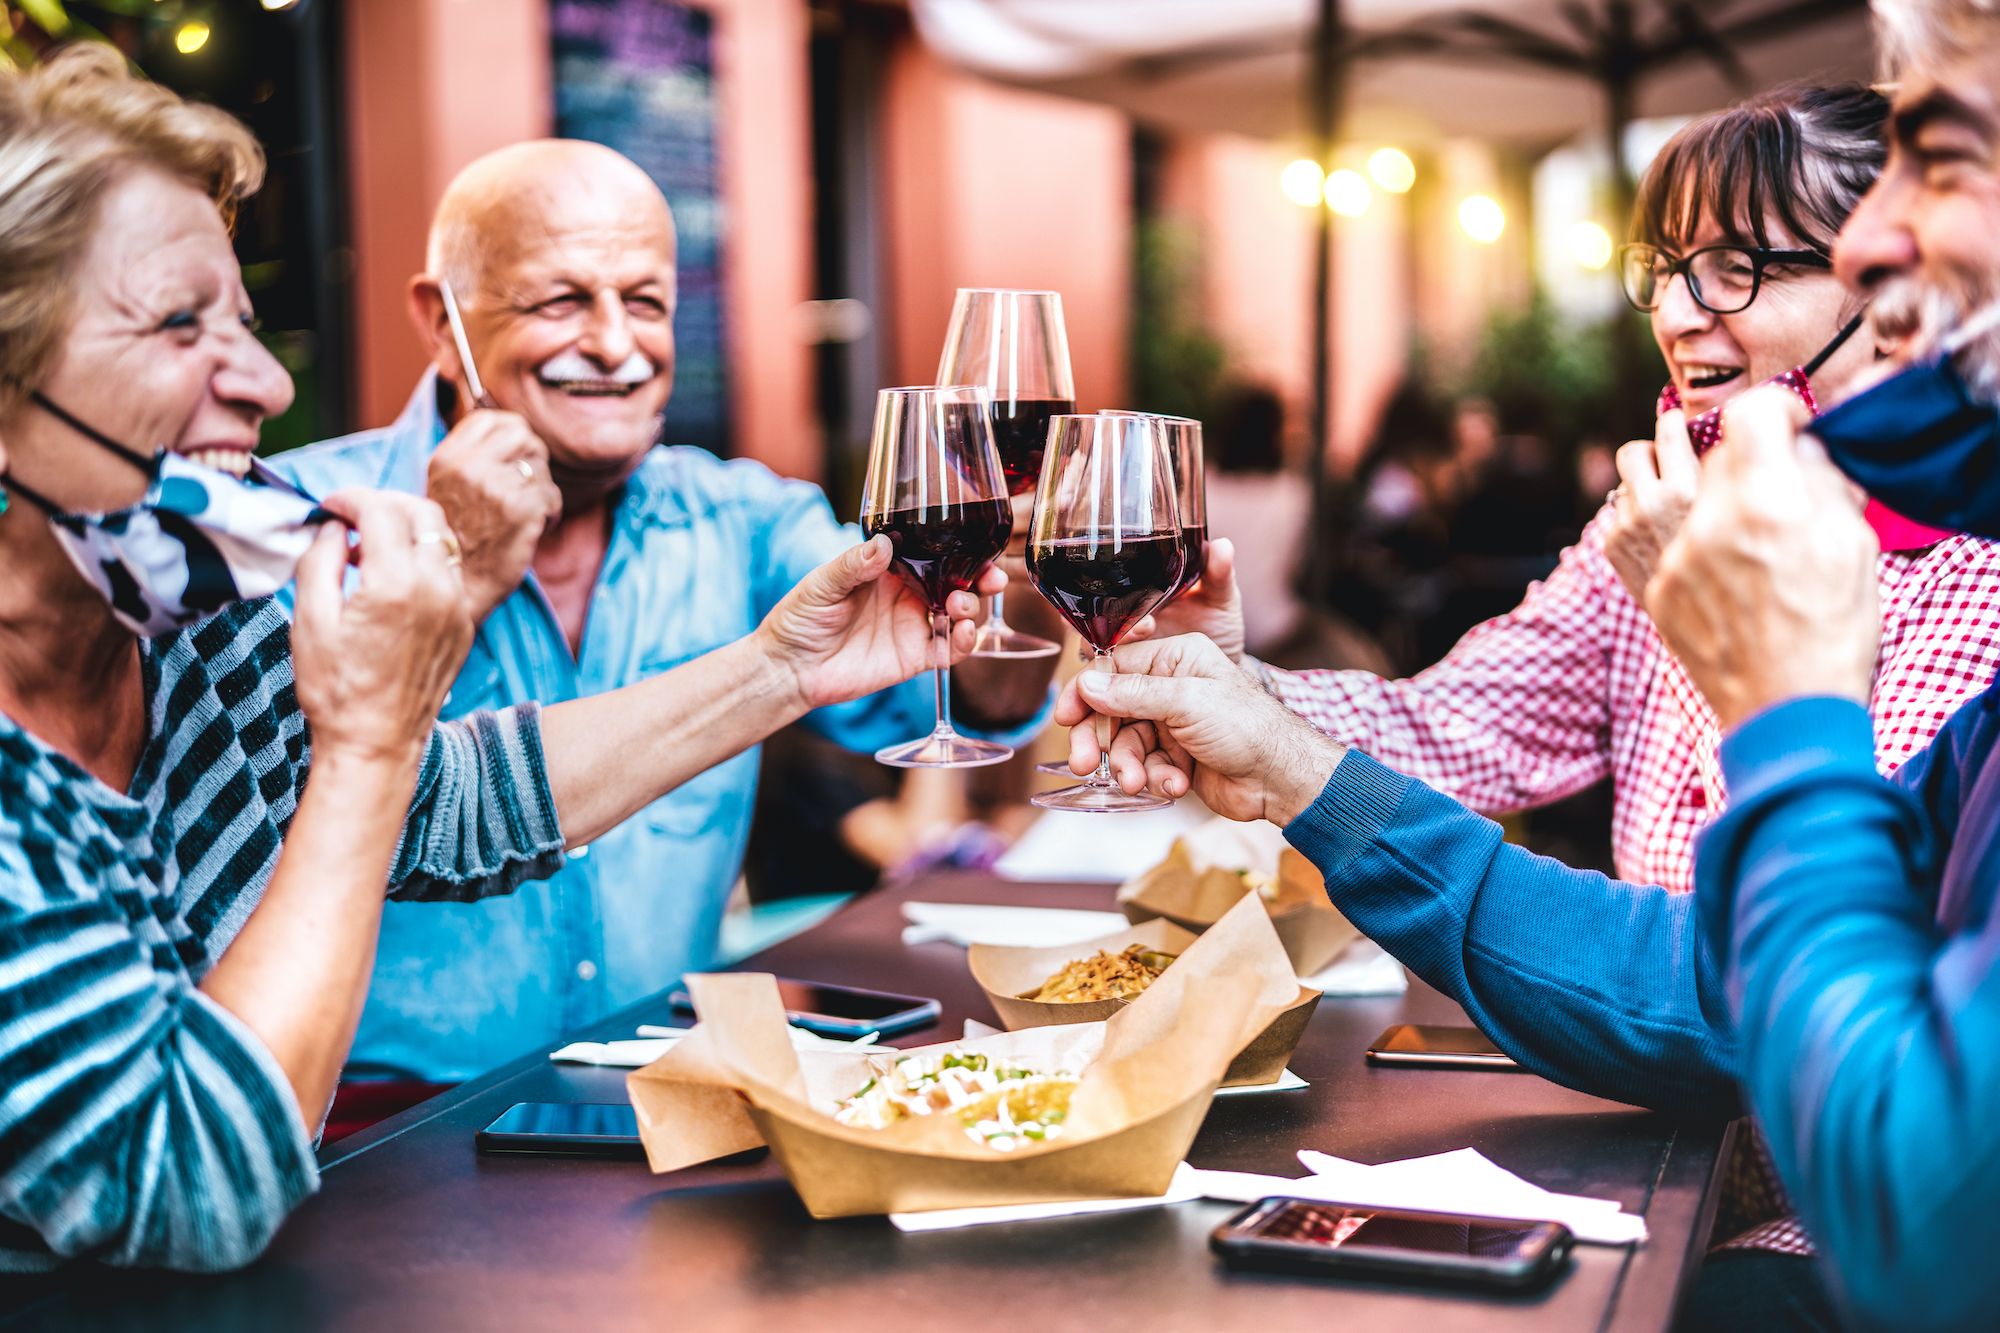 A group of older people at a restaurant clinking half-full wine glasses, with their masks pulled down around their chins to reveal a smile. Food is on the table.